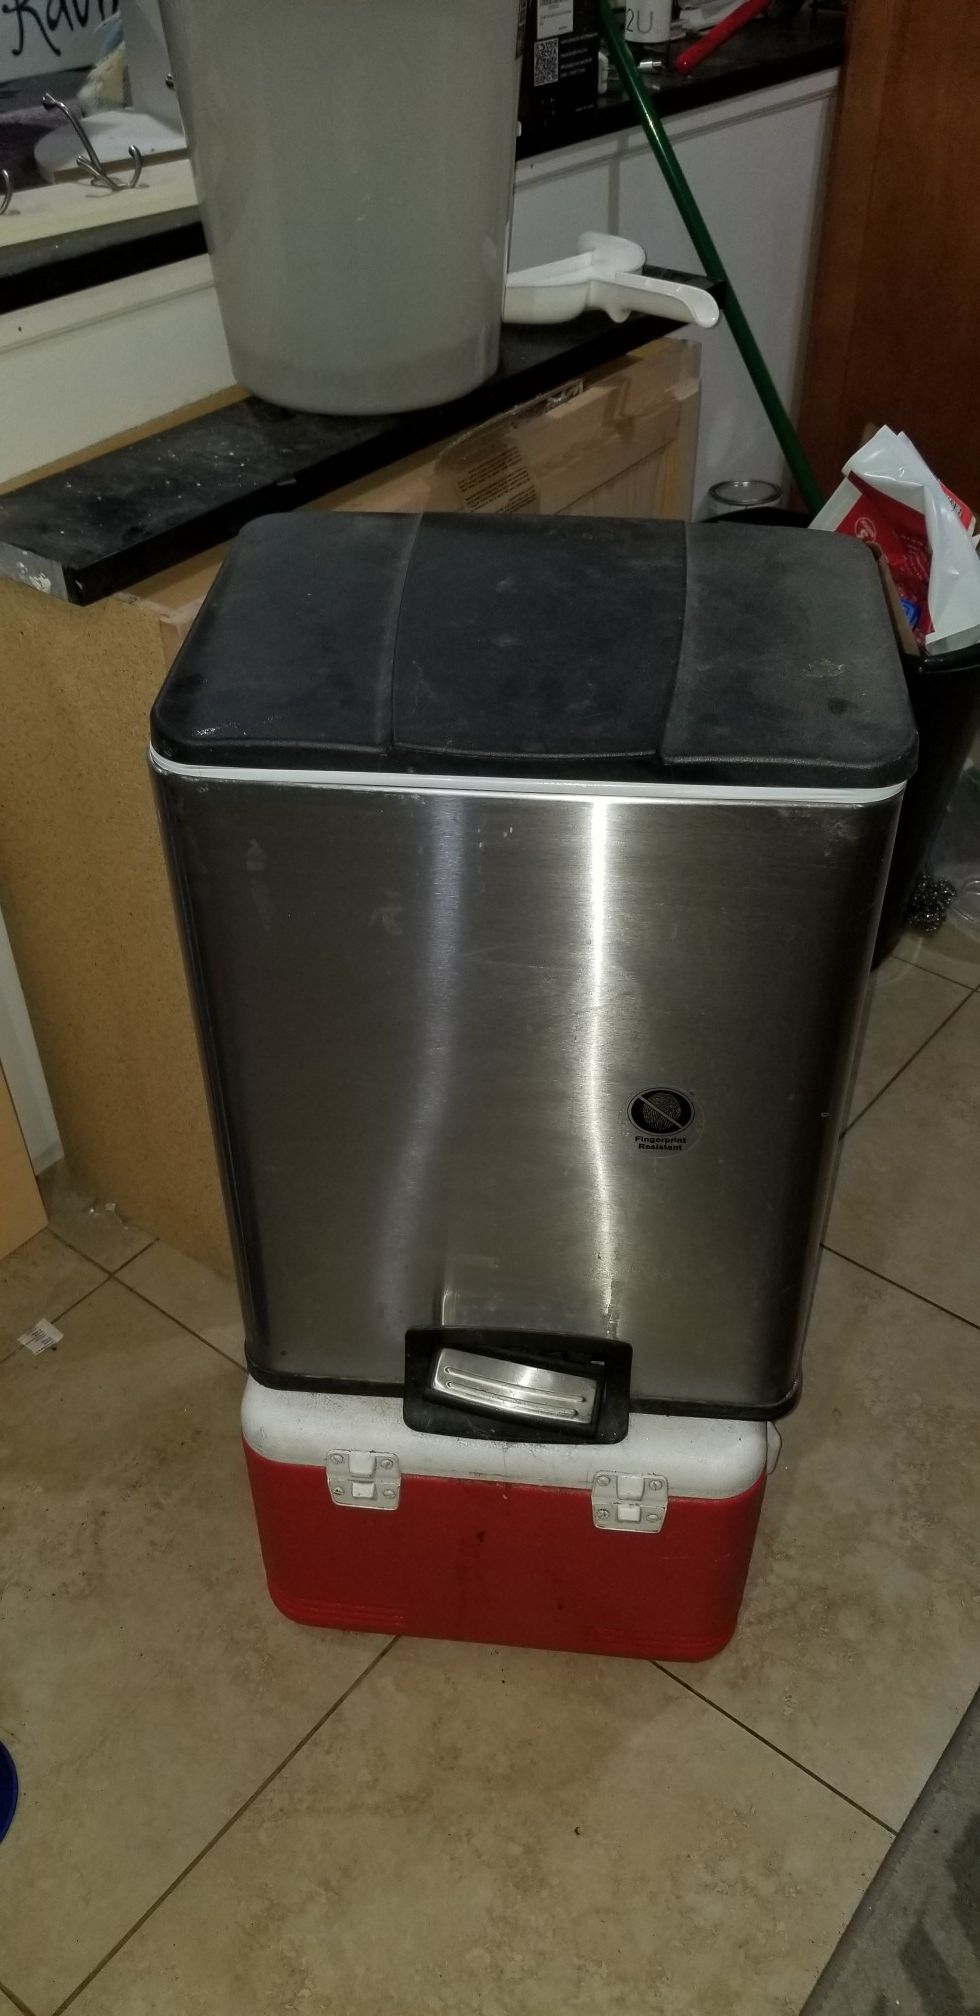 Stainless steal garbage can.